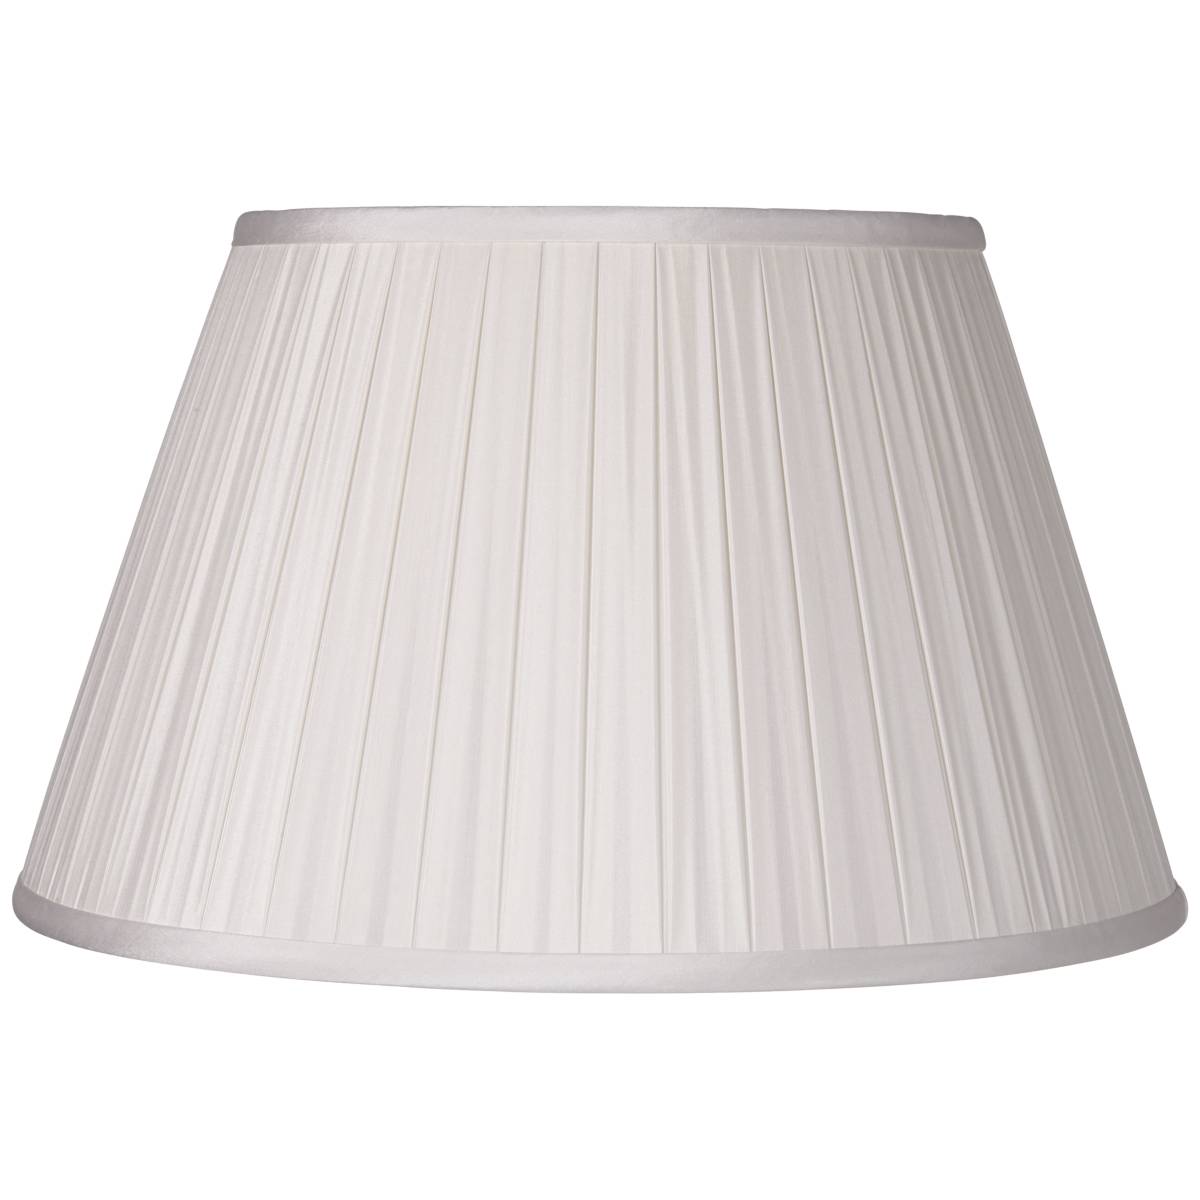 Pleated, Lamp Shades - Page 2 | Lamps Plus